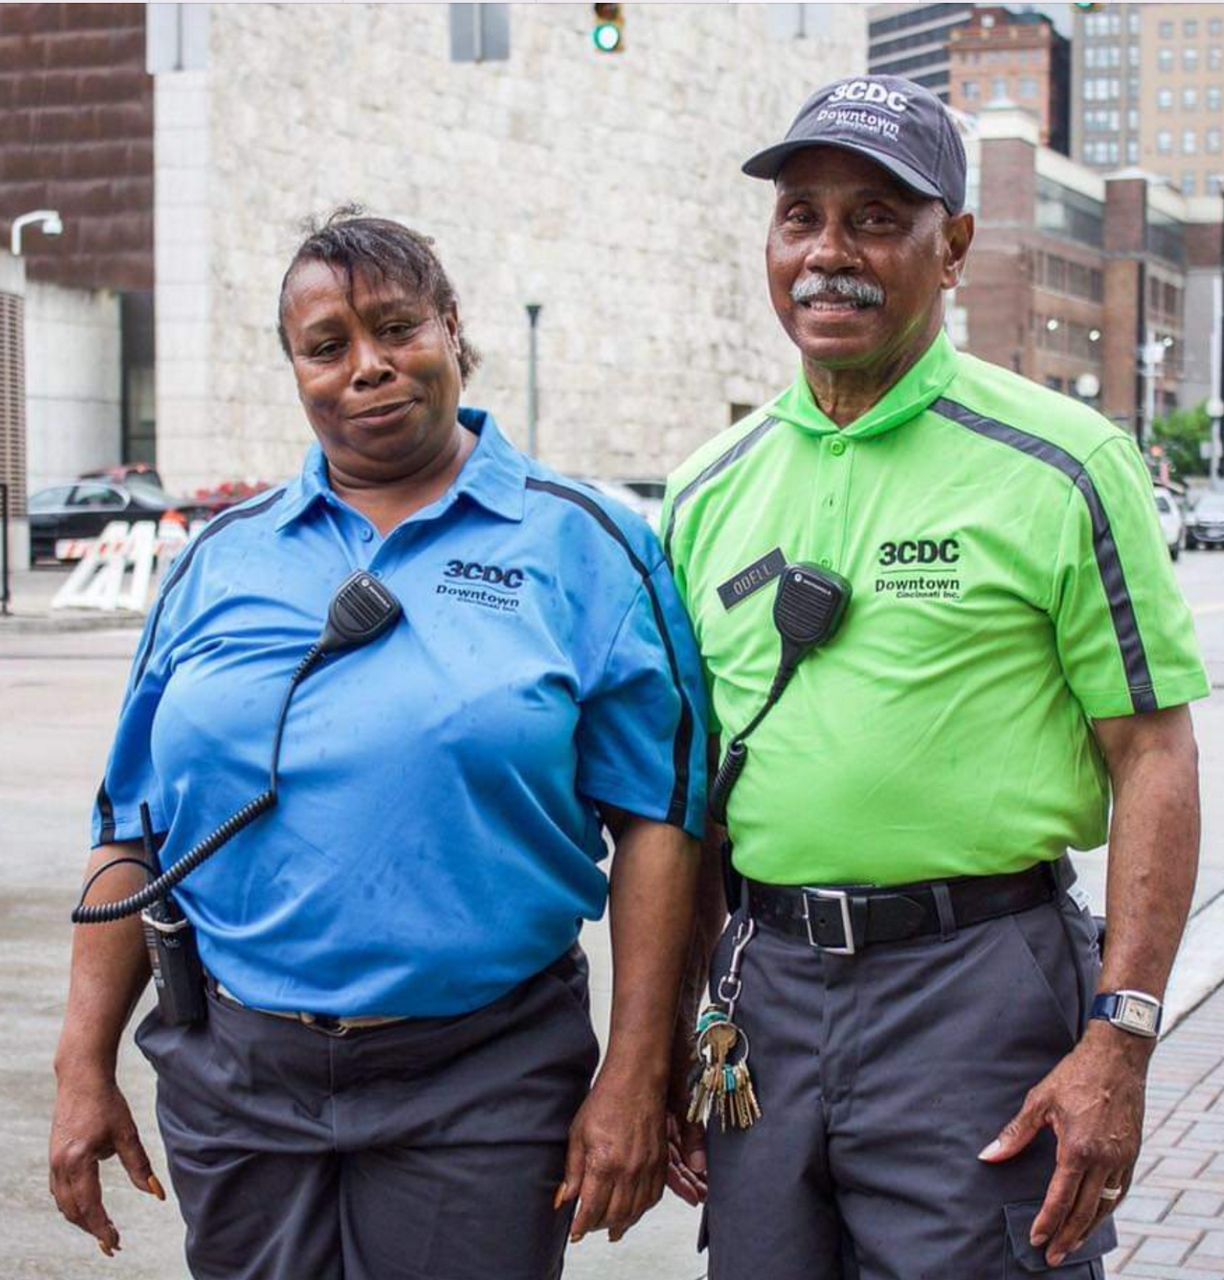 Two of the Ambassadors pose for a picture at The Banks along Cincinnati's riverfront. (Photo courtesy of 3CDC)